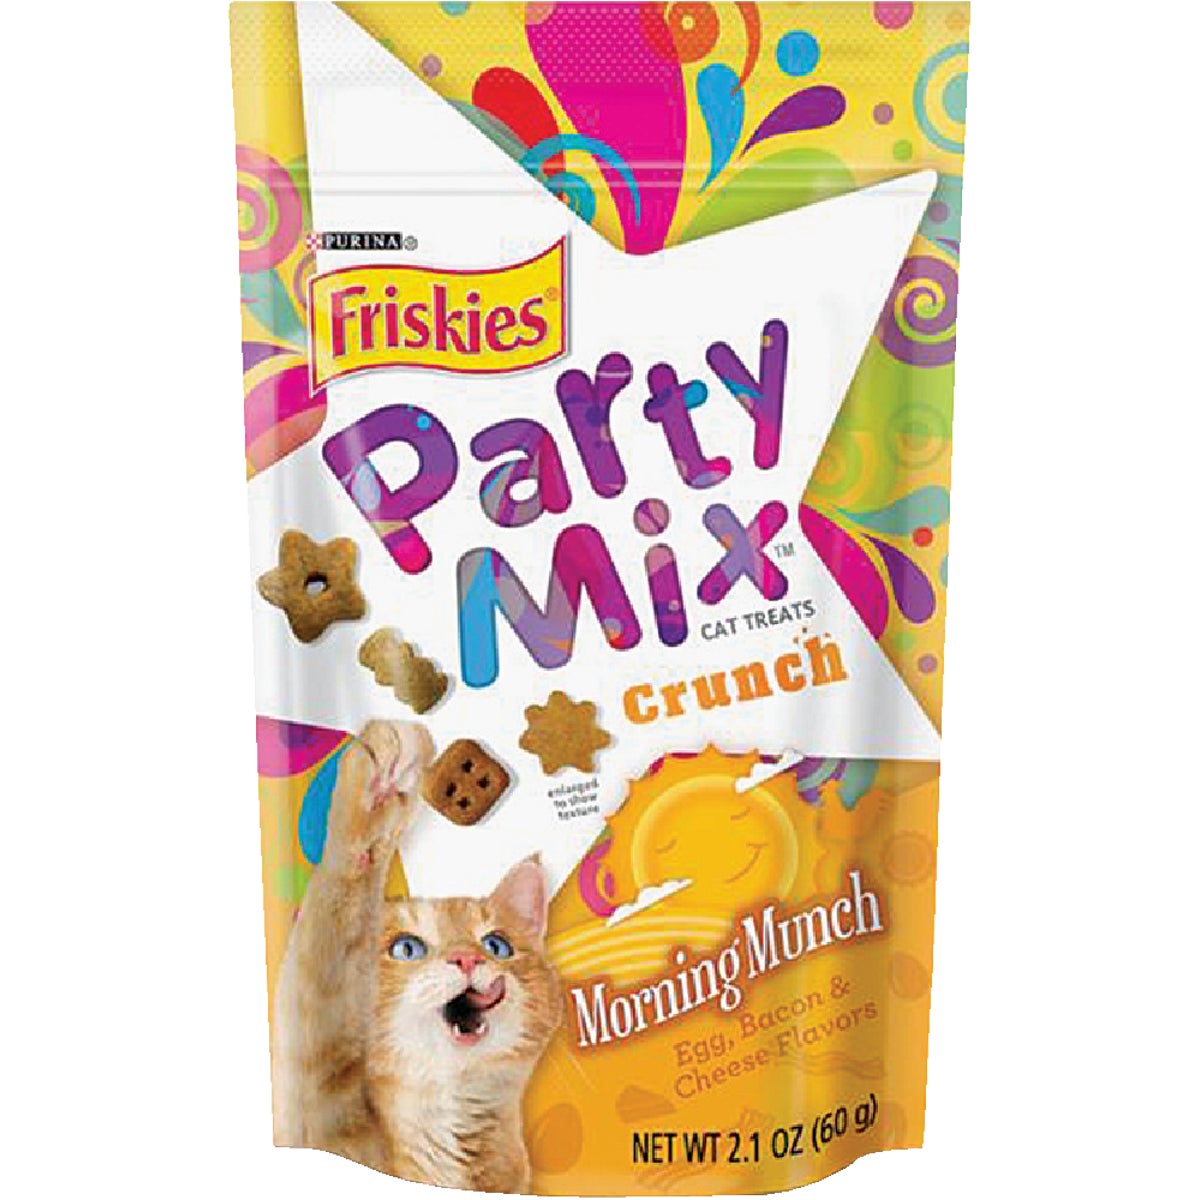 Purina Party Mix Morning Munch-Egg, Bacon, & Cheese 2.1 Oz. Cat Treat